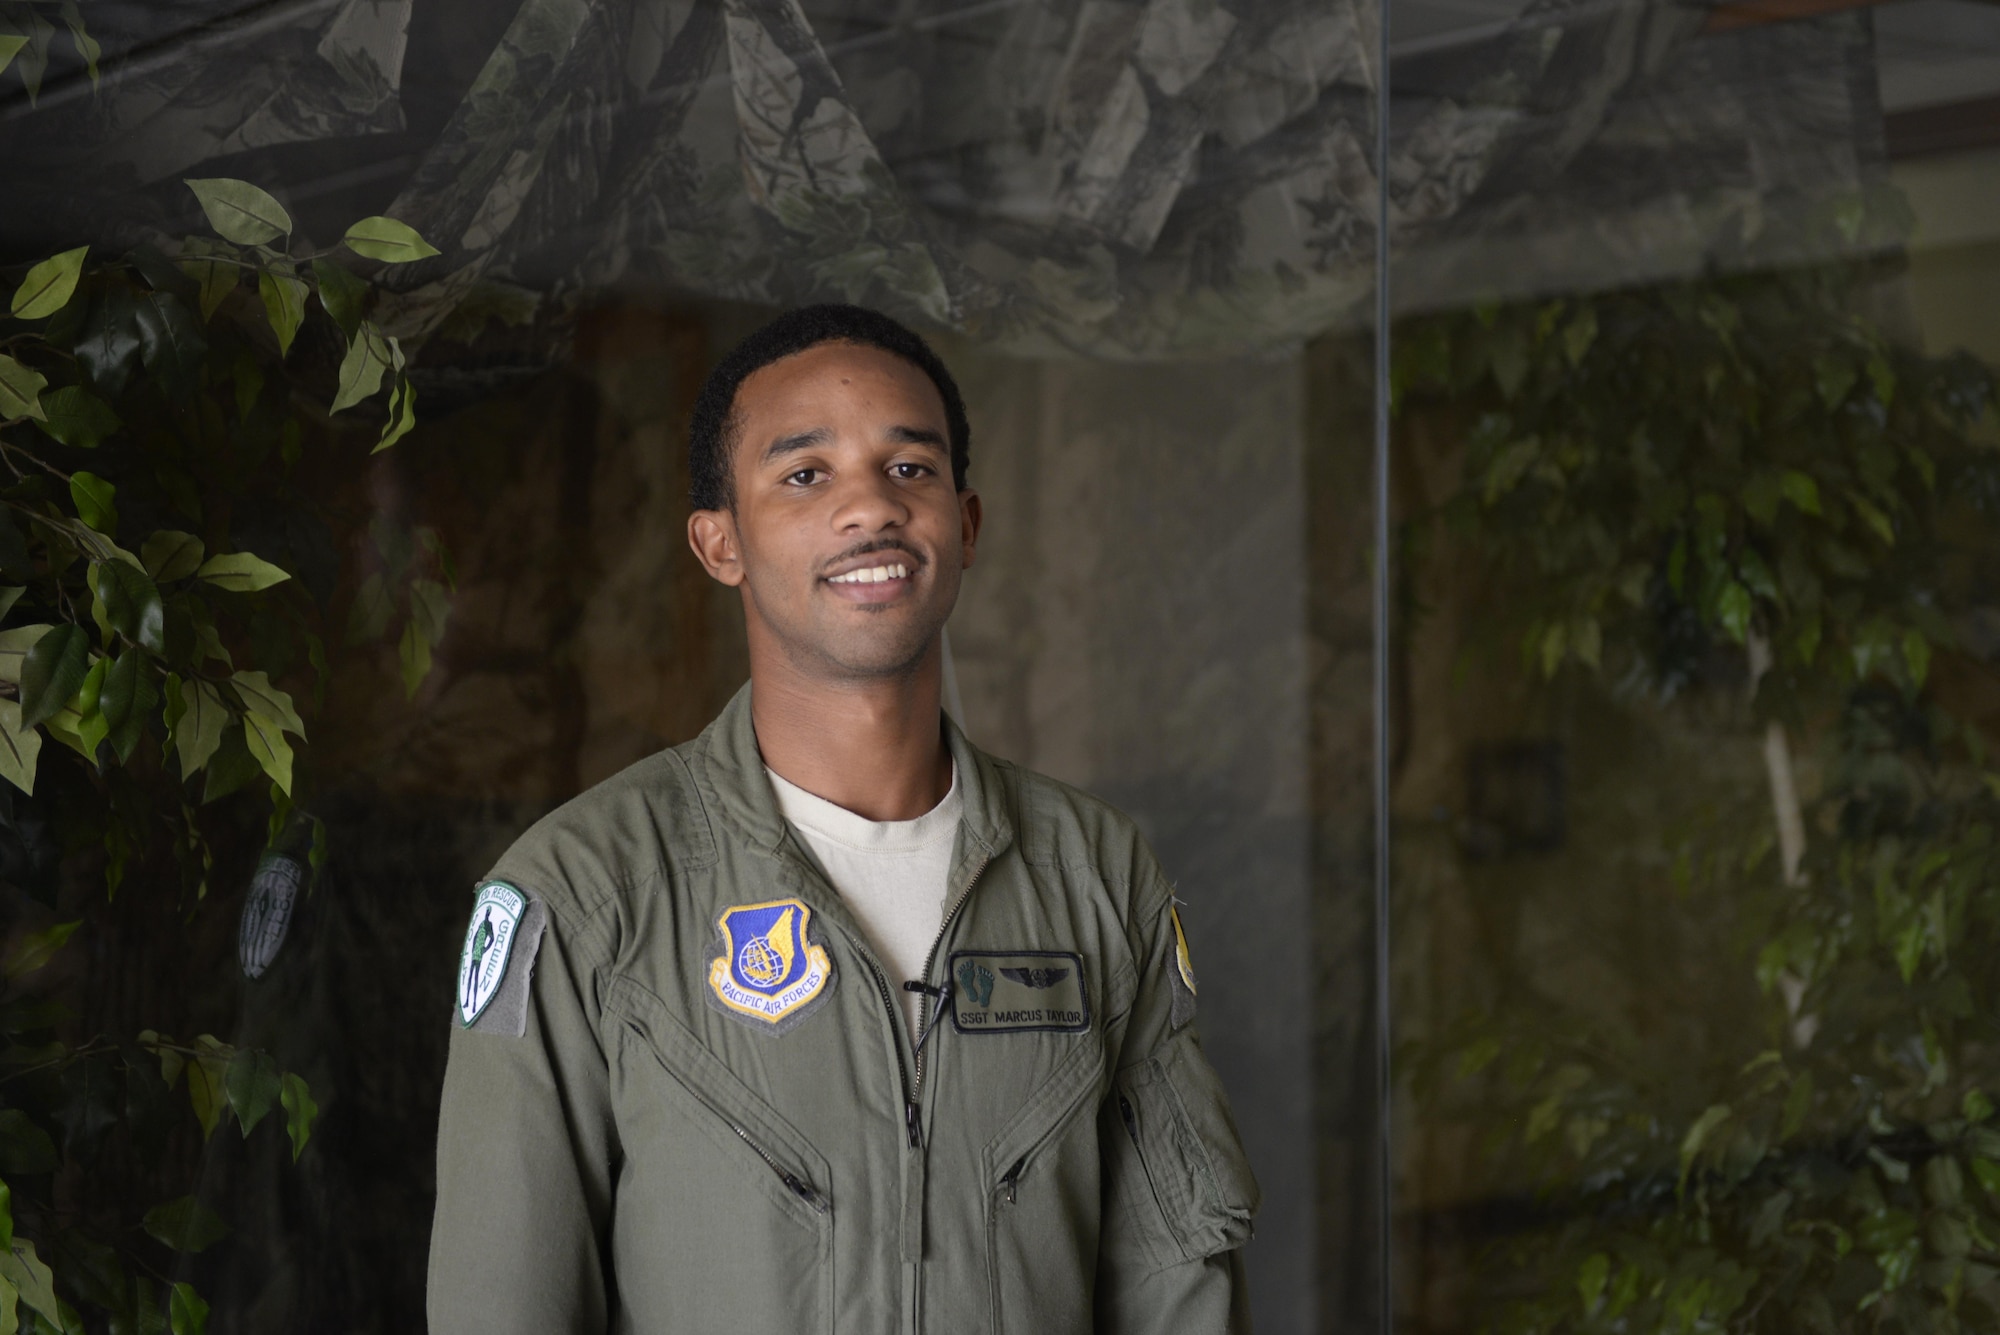 U.S. Air Force Staff Sgt. Marcus Taylor, 33rd Rescue Squadron special mission’s aviator, was part of the team to rescue a III Marine Expeditionary Force pilot after he ejected from his AV-8B Harrier Sept. 22, 2016, off the coast of Okinawa, Japan. The pilot ejected safely from his aircraft and was rescued successfully by the 31st and 33rd Rescue Squadrons. (U.S. Air Force photo by Senior Airman Stephen G. Eigel)